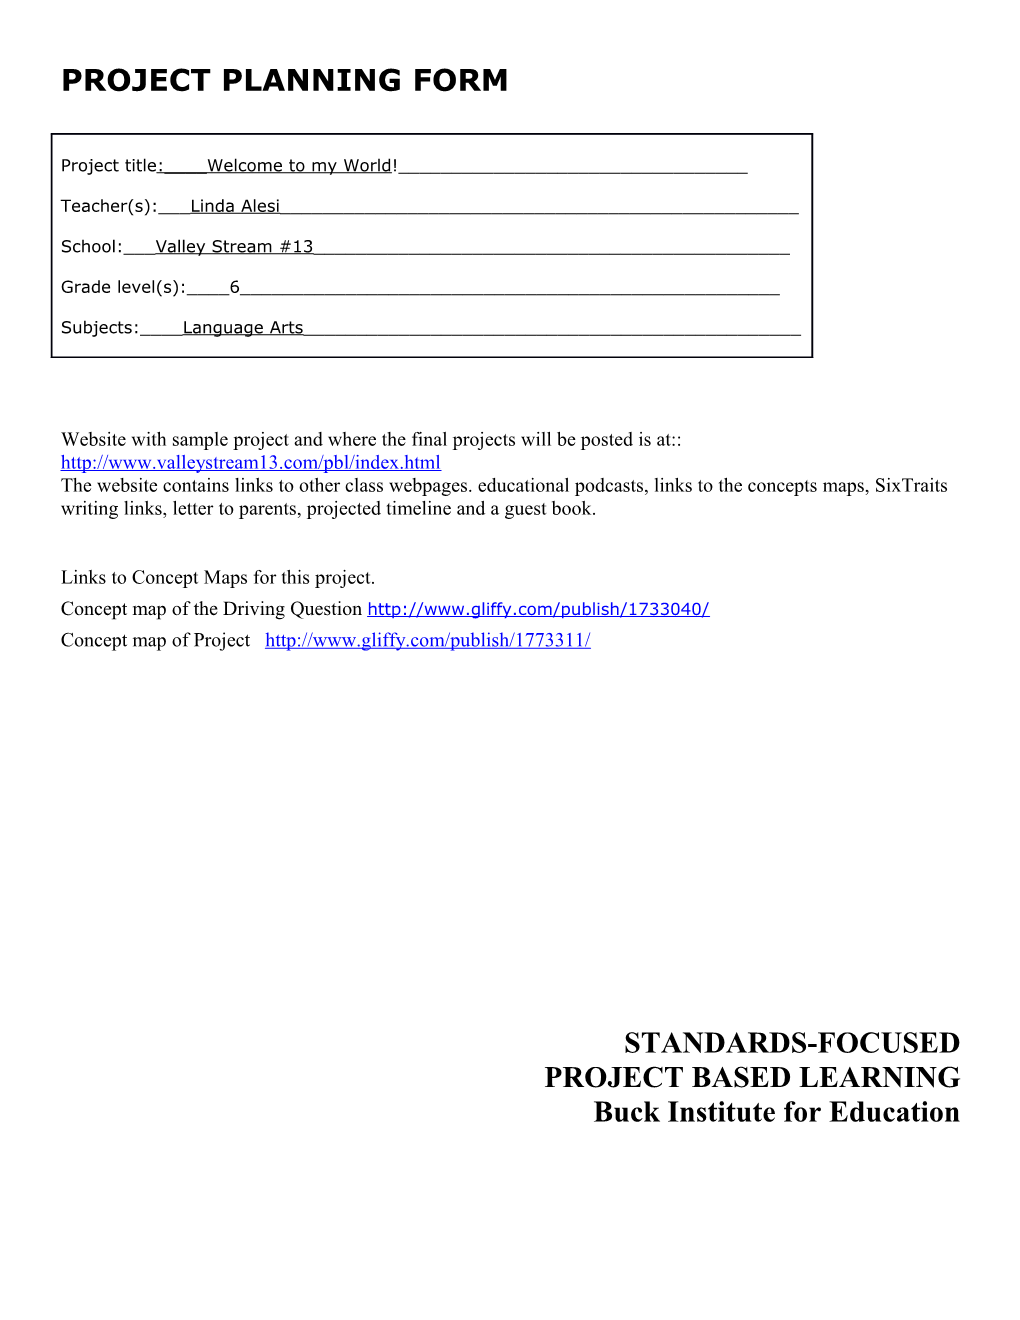 Project Planning Form